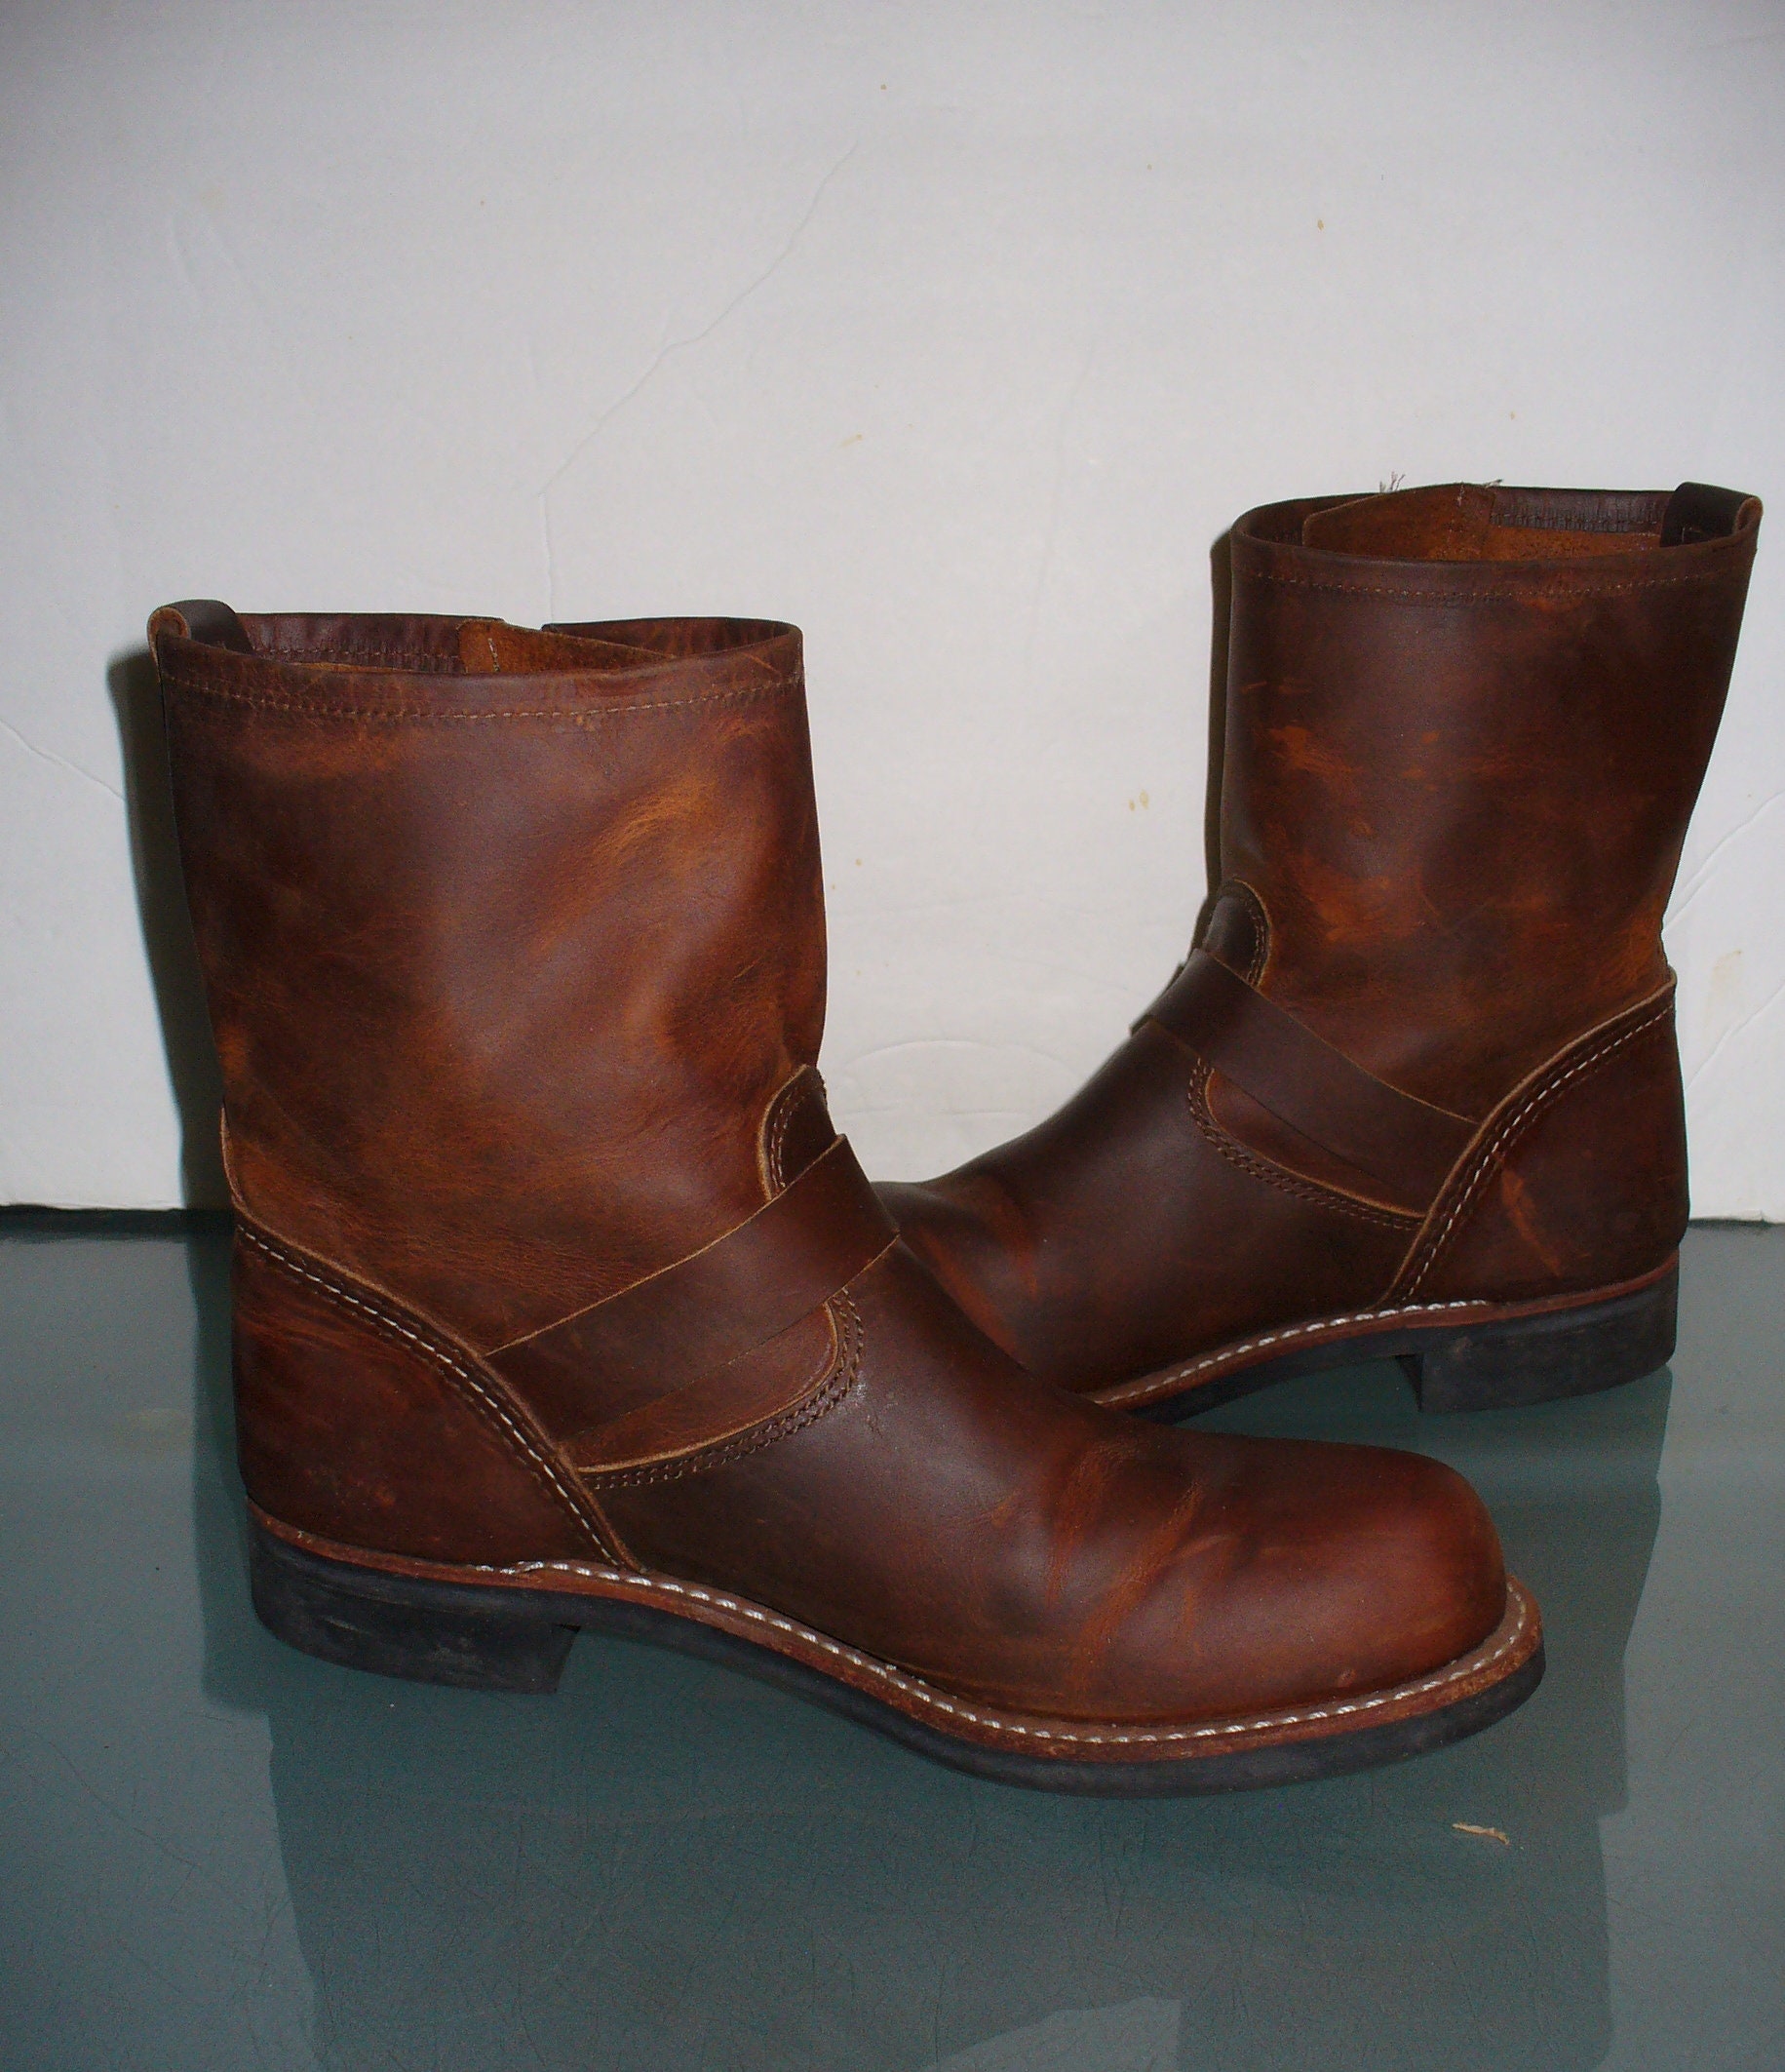 Red Wing Engineer Boots With Buckle Straps 8.5 B